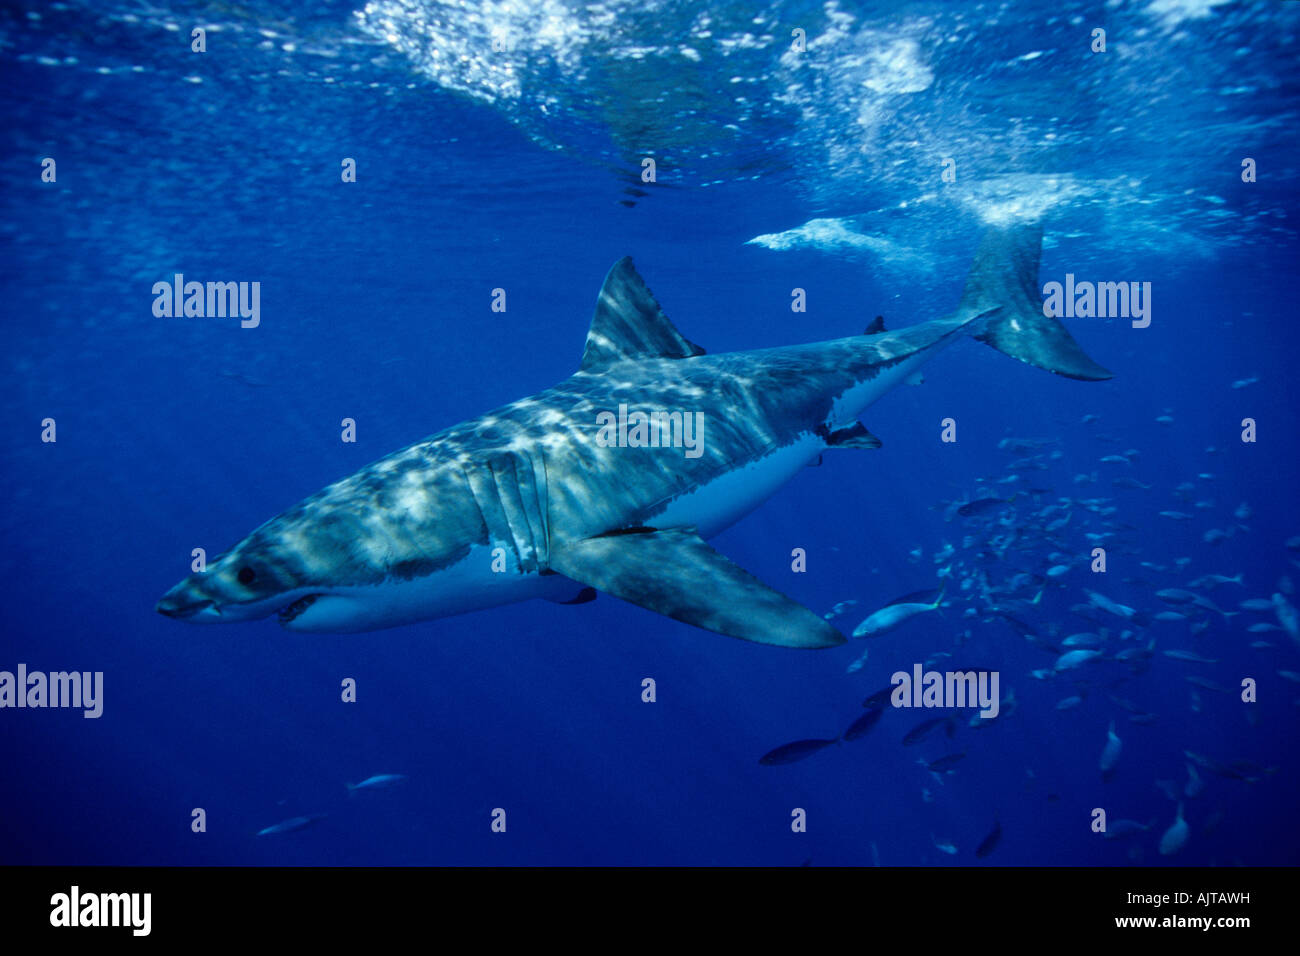 great white shark Carcharodon carcharias Guadalupe Island Pacific Ocean Mexico Stock Photo